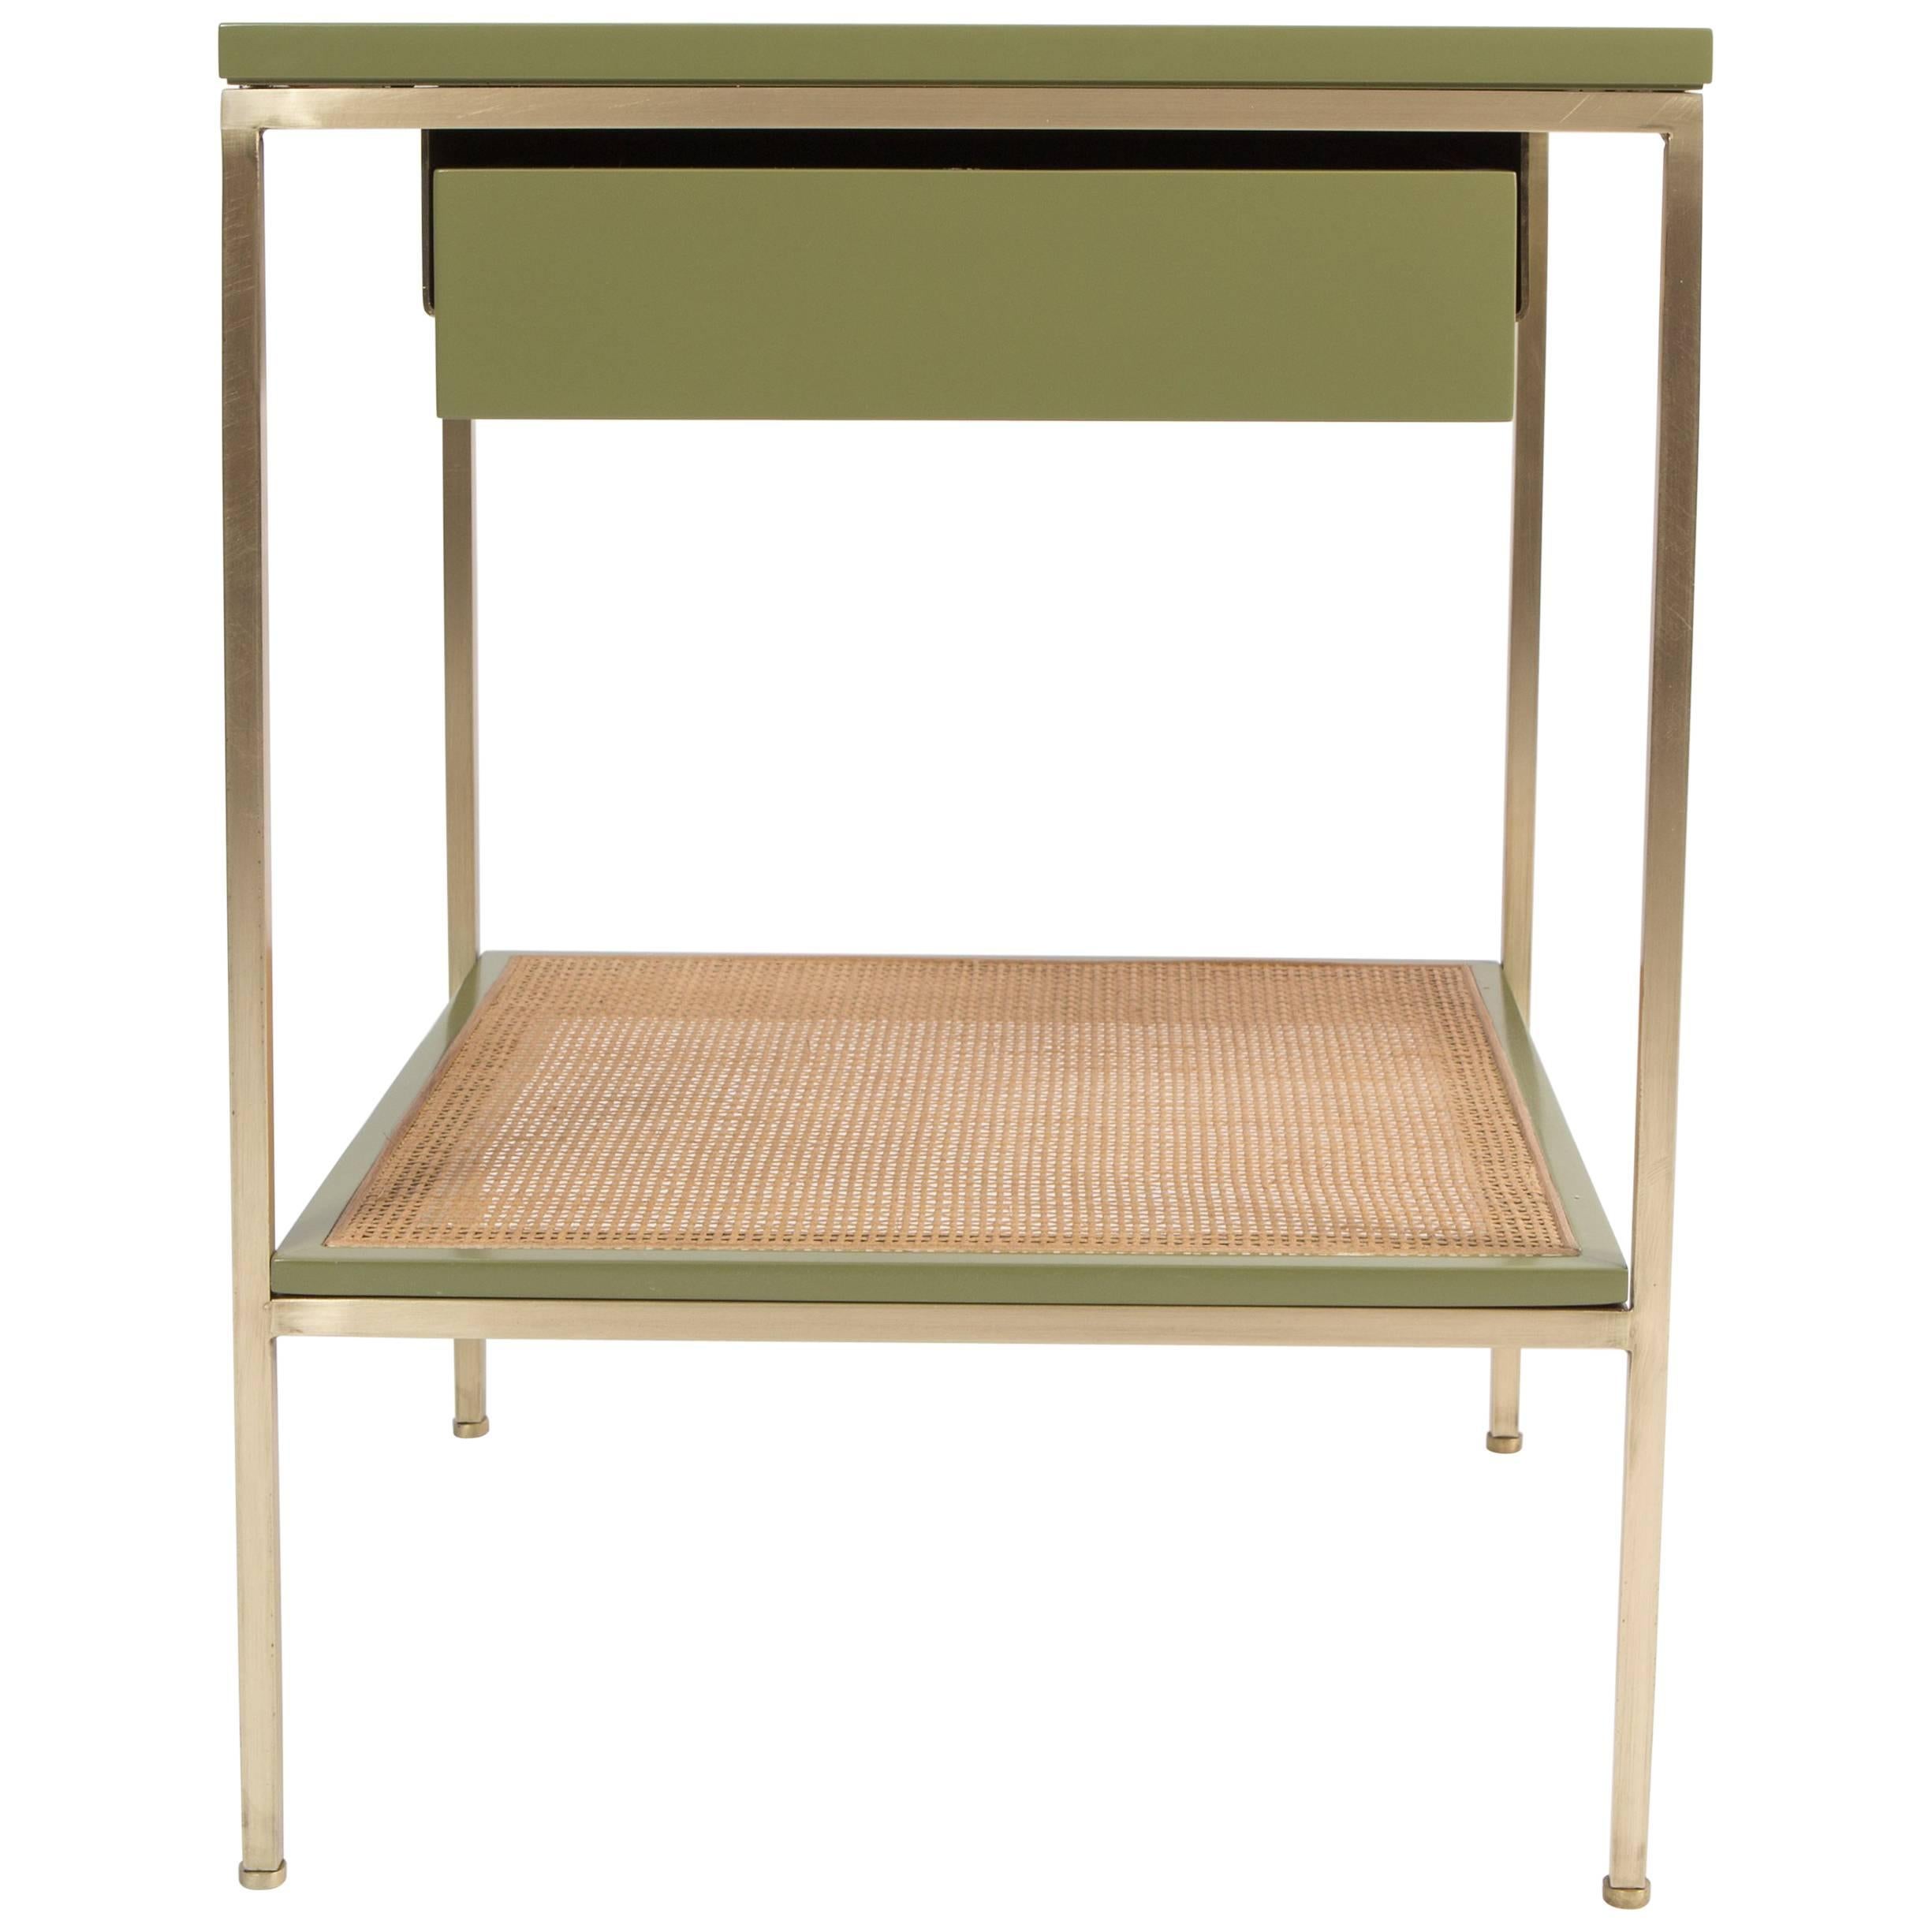 Re: 392 Bedside Table in Serpentine Green on Satin Brass frame with Caned shelf